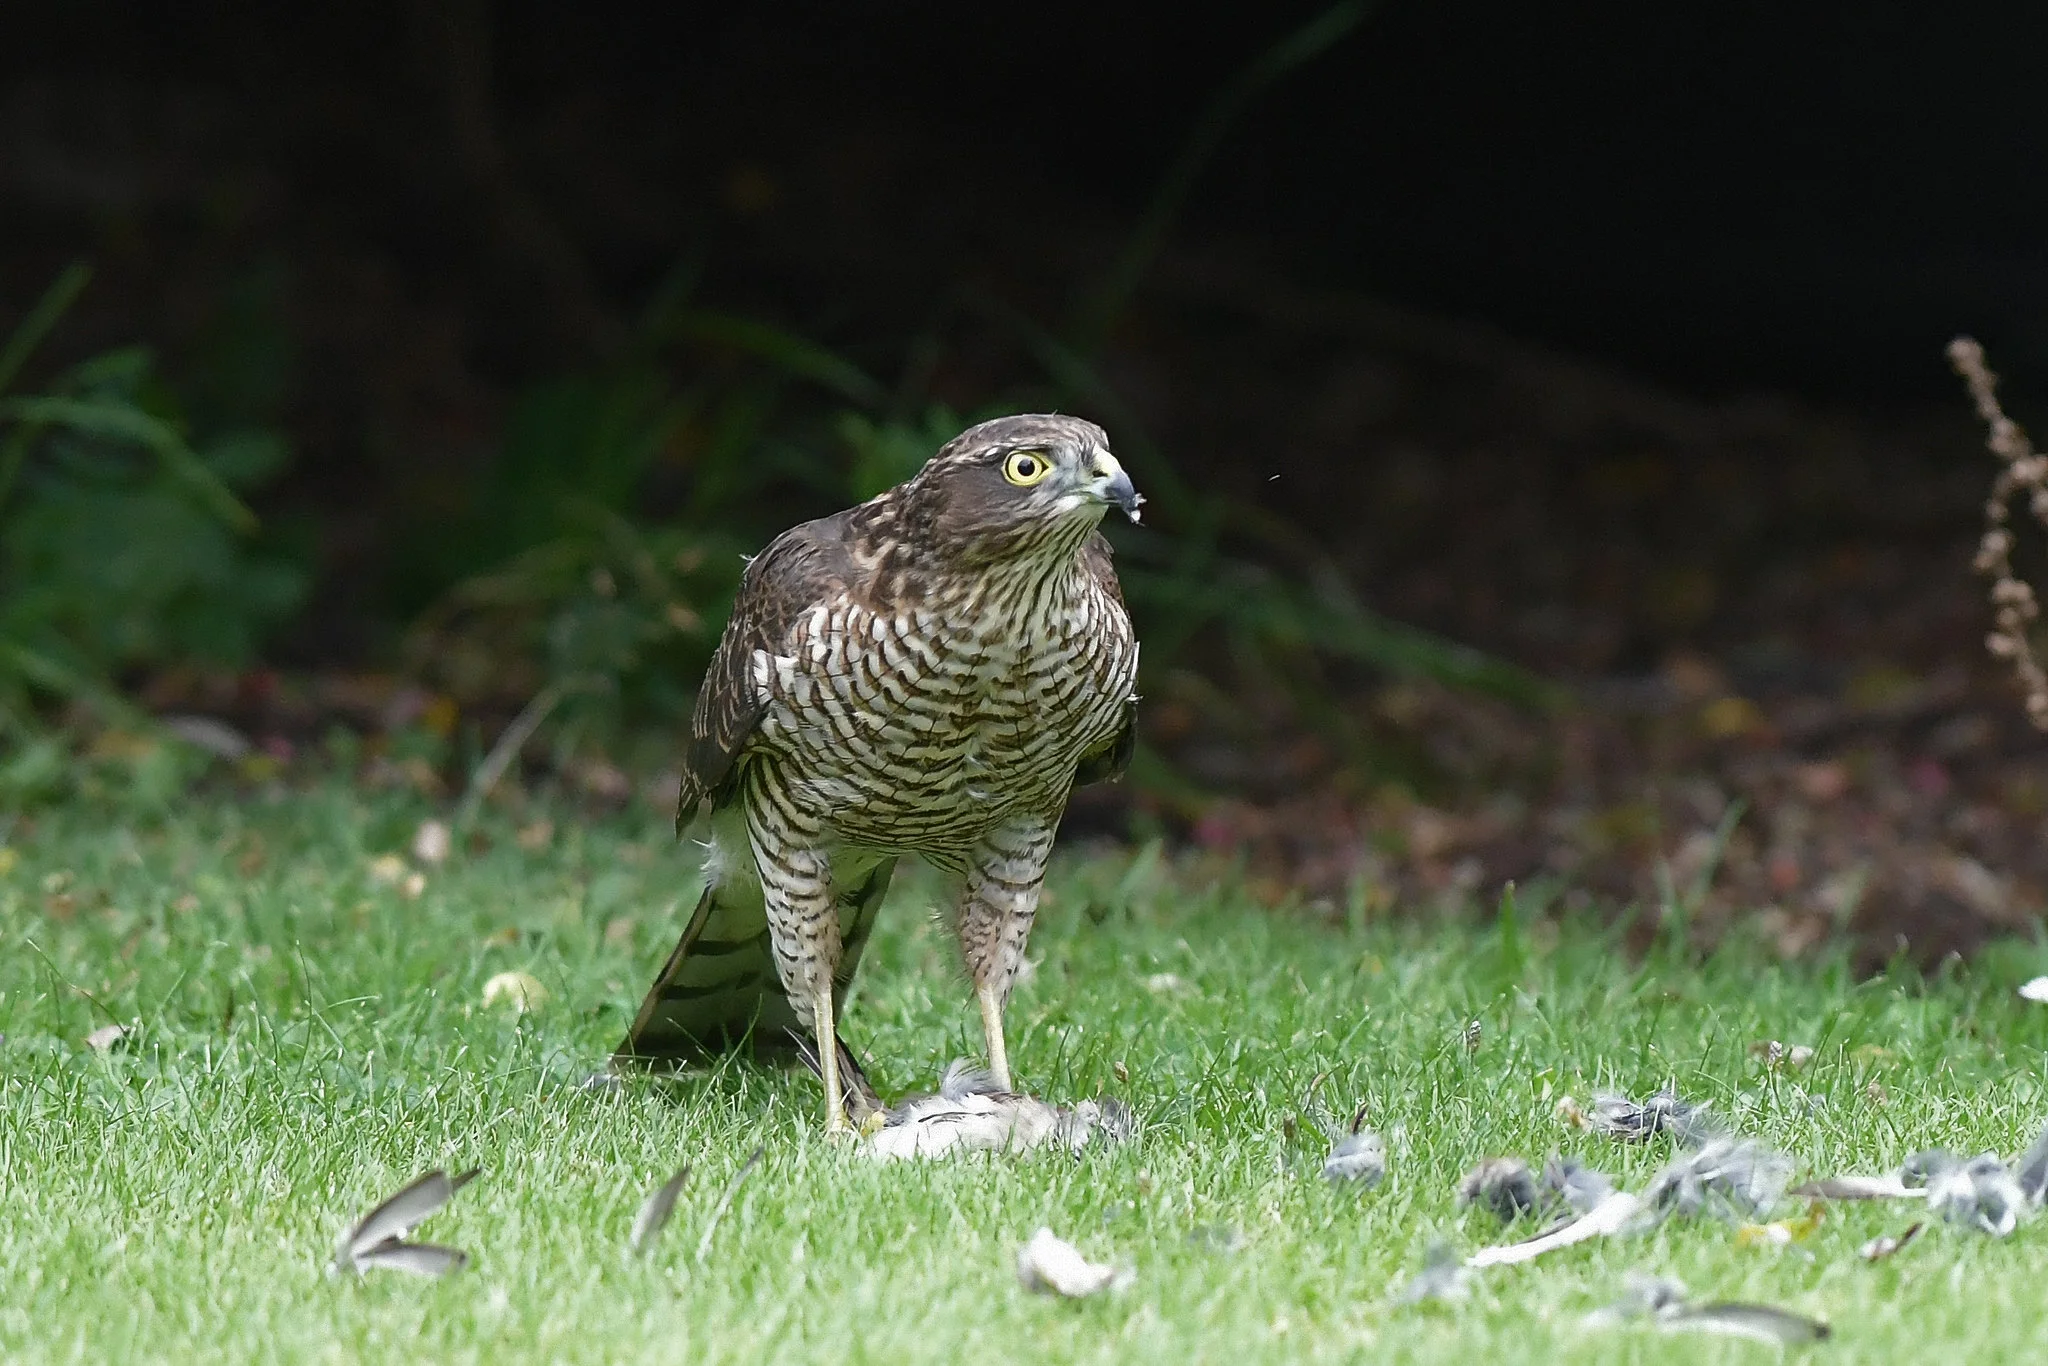 What do sparrowhawks eat? Well, here a female sparrowhawk is eating a House Sparrow.